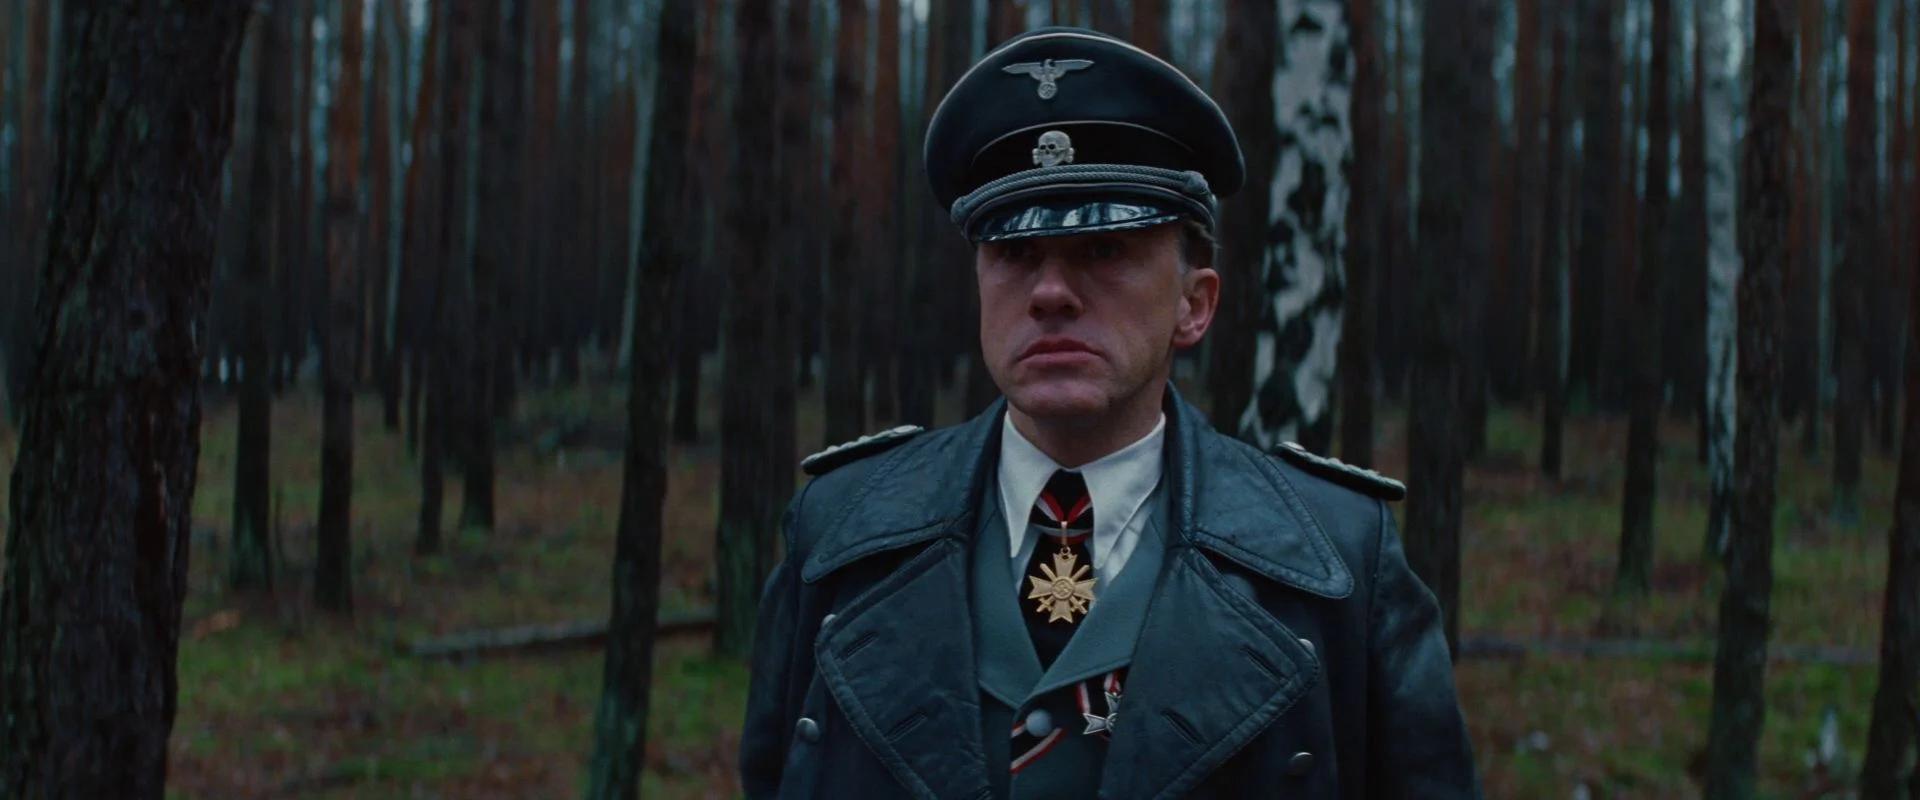 "The appearance of Colonel Hans Landa"